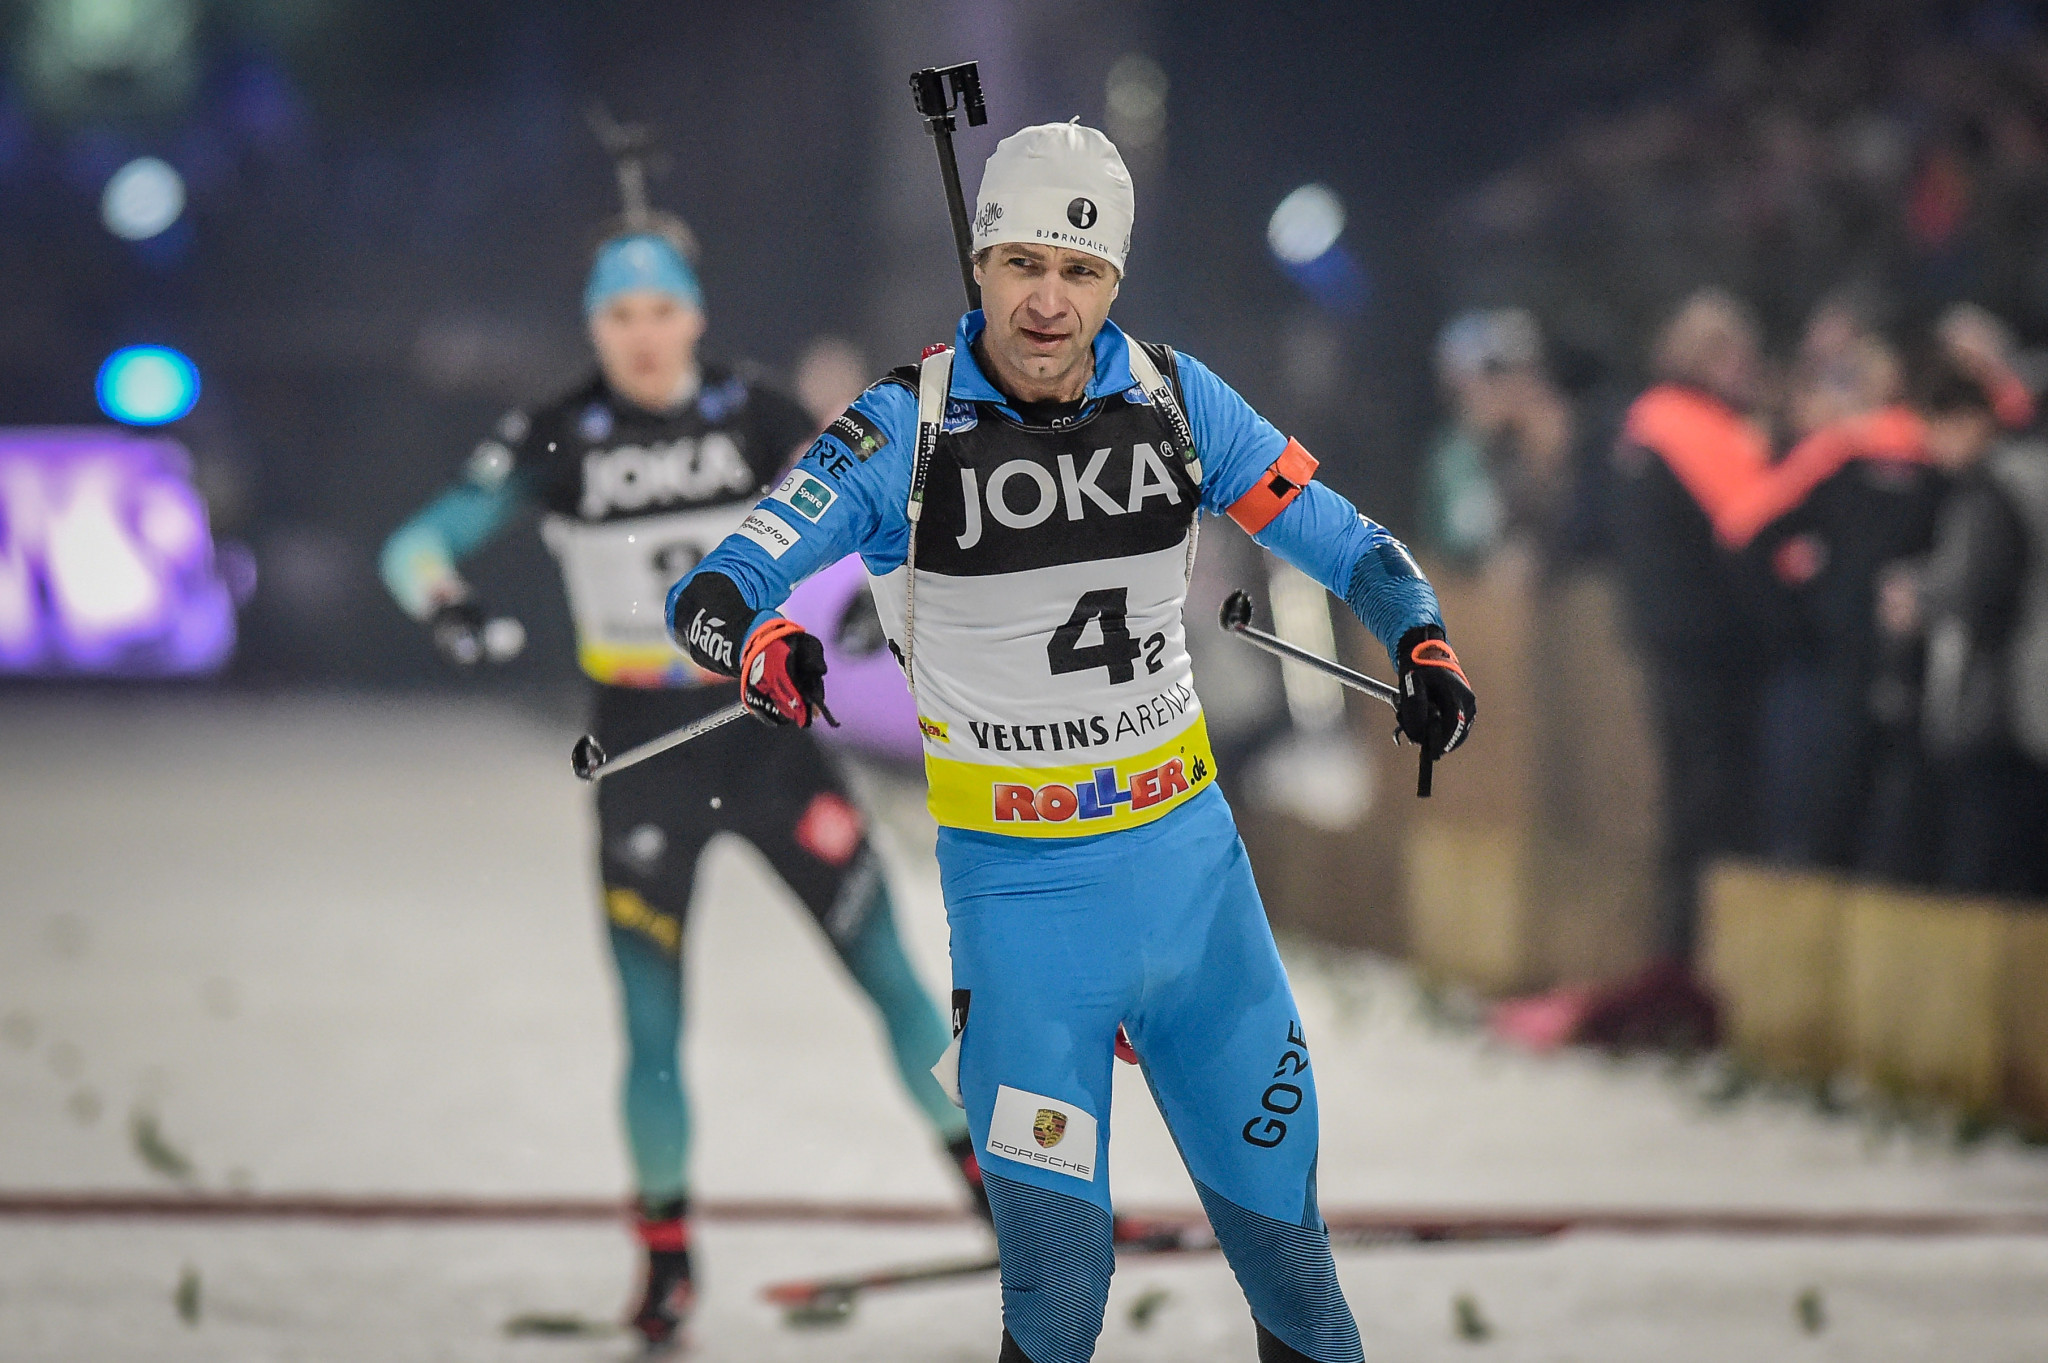 Ole Einar Bjørndalen is the most decorated biathlete at the Winter Olympic Games with 13 medals ©Getty Images